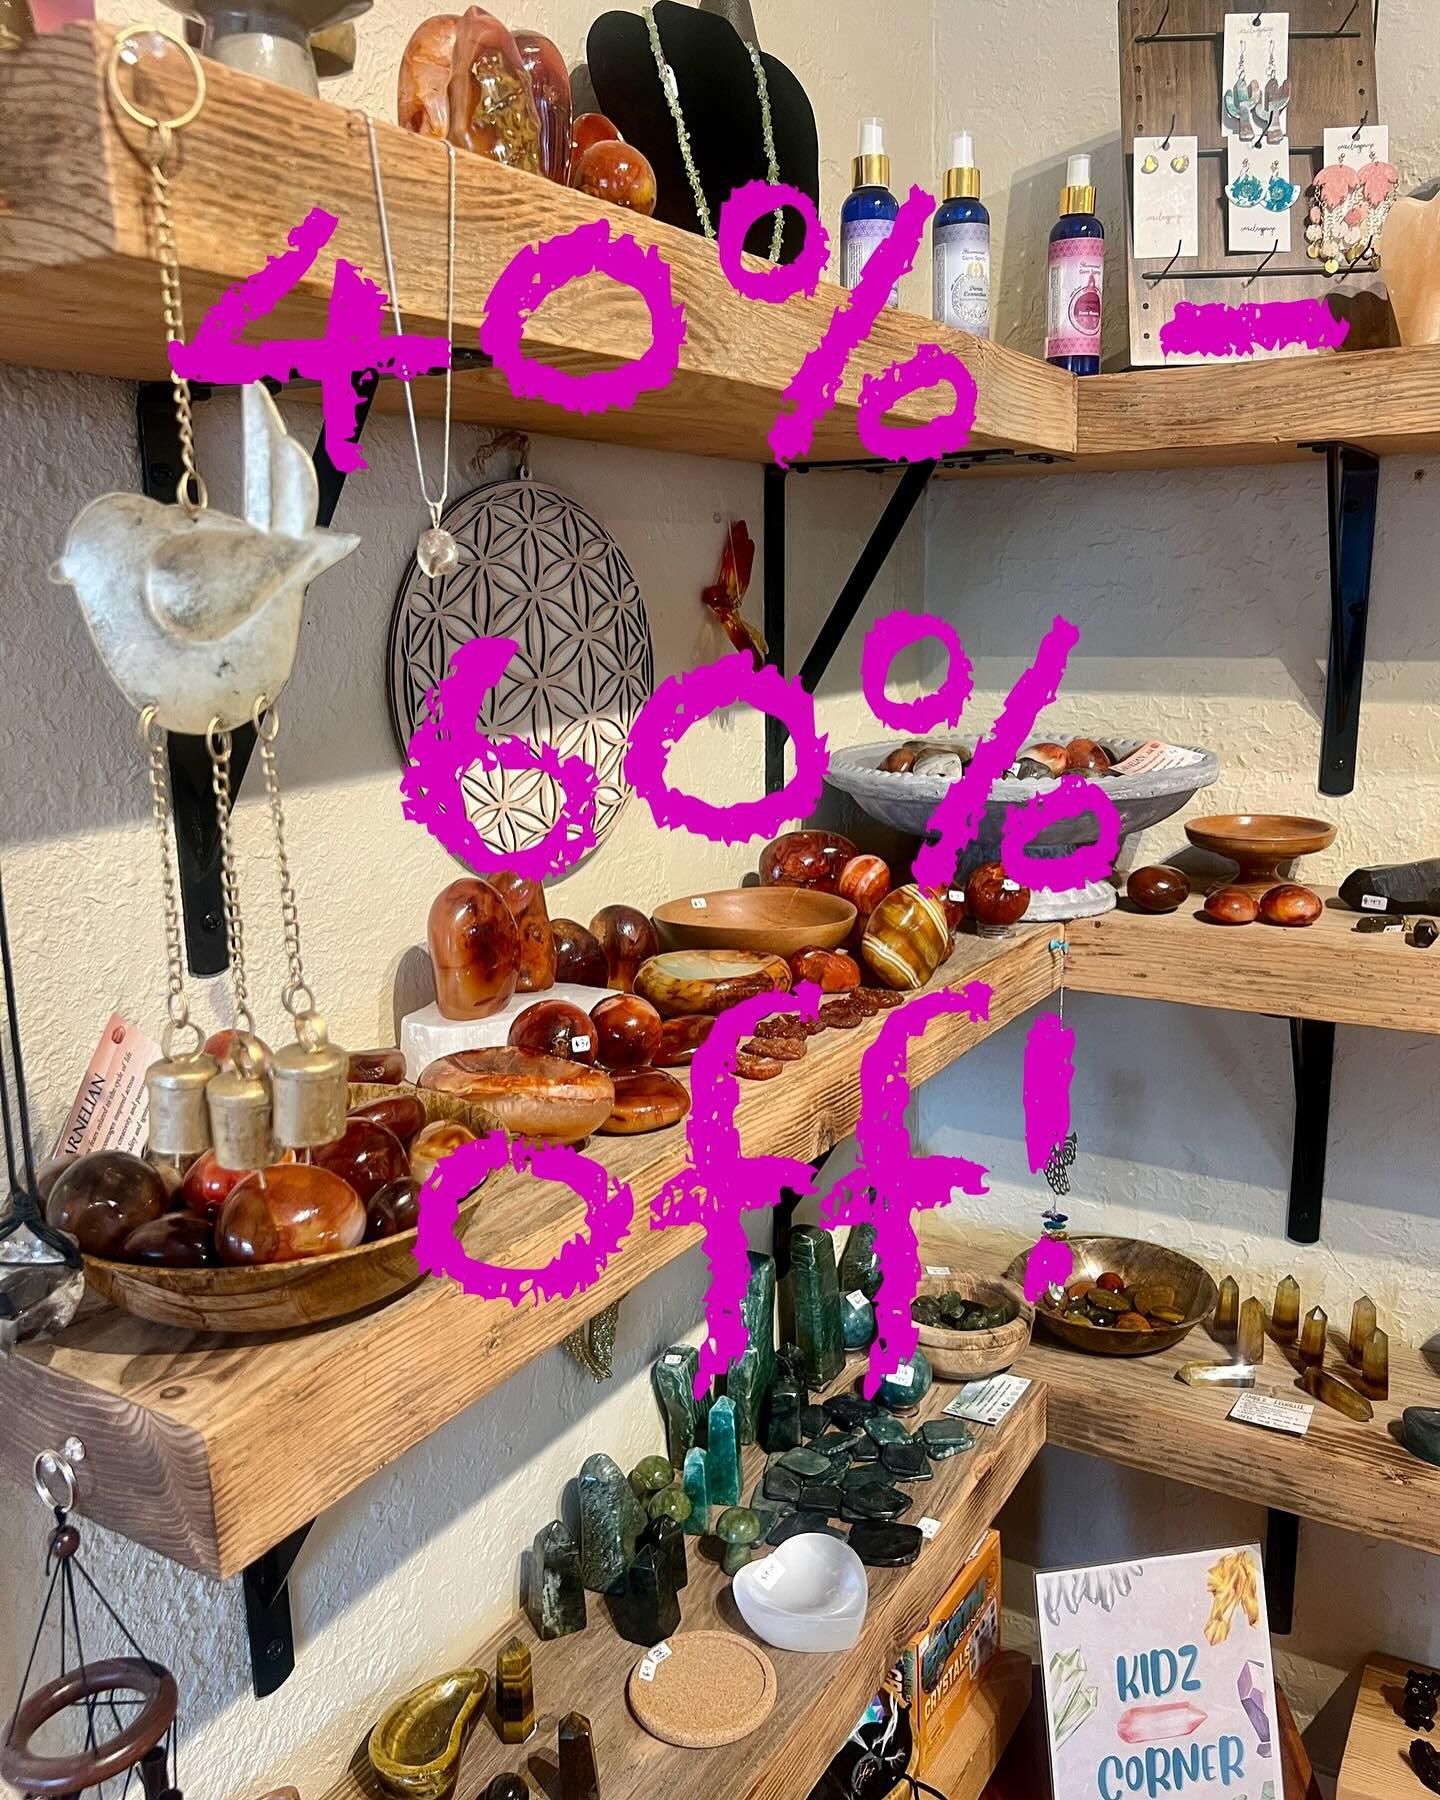 🌟 sale is continuing! 40% - 60% off storewide! 

(Local items not one sale)
.
.
.
#sale #local #smallbusiness #springsale #treatyoself